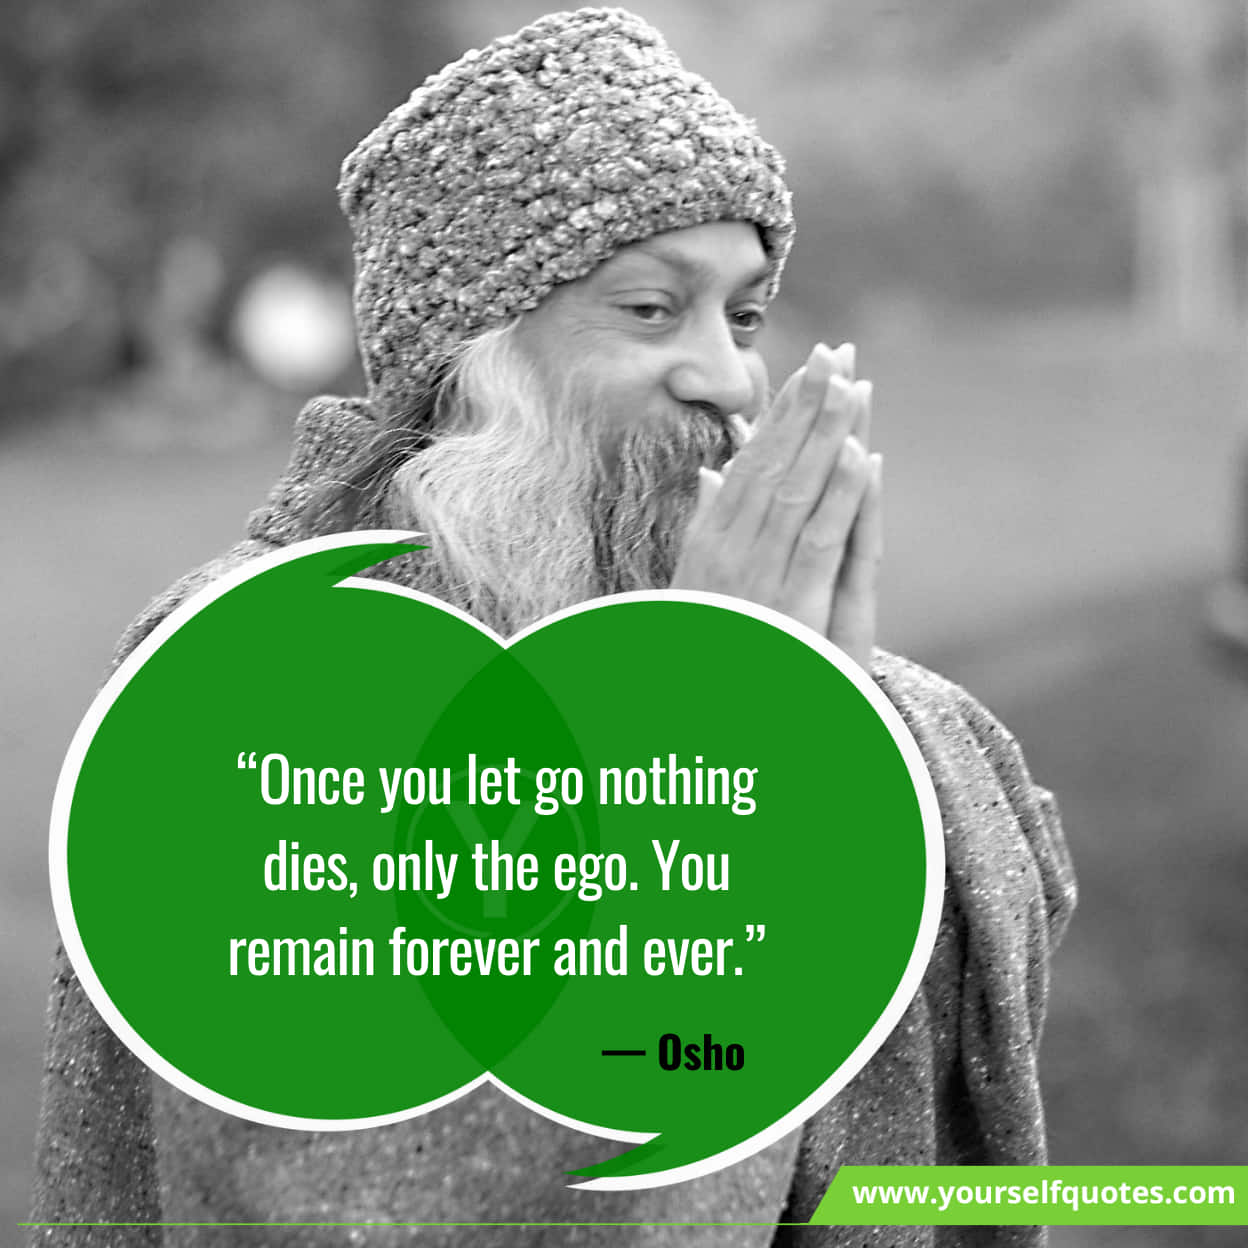 Osho Quotes for Love